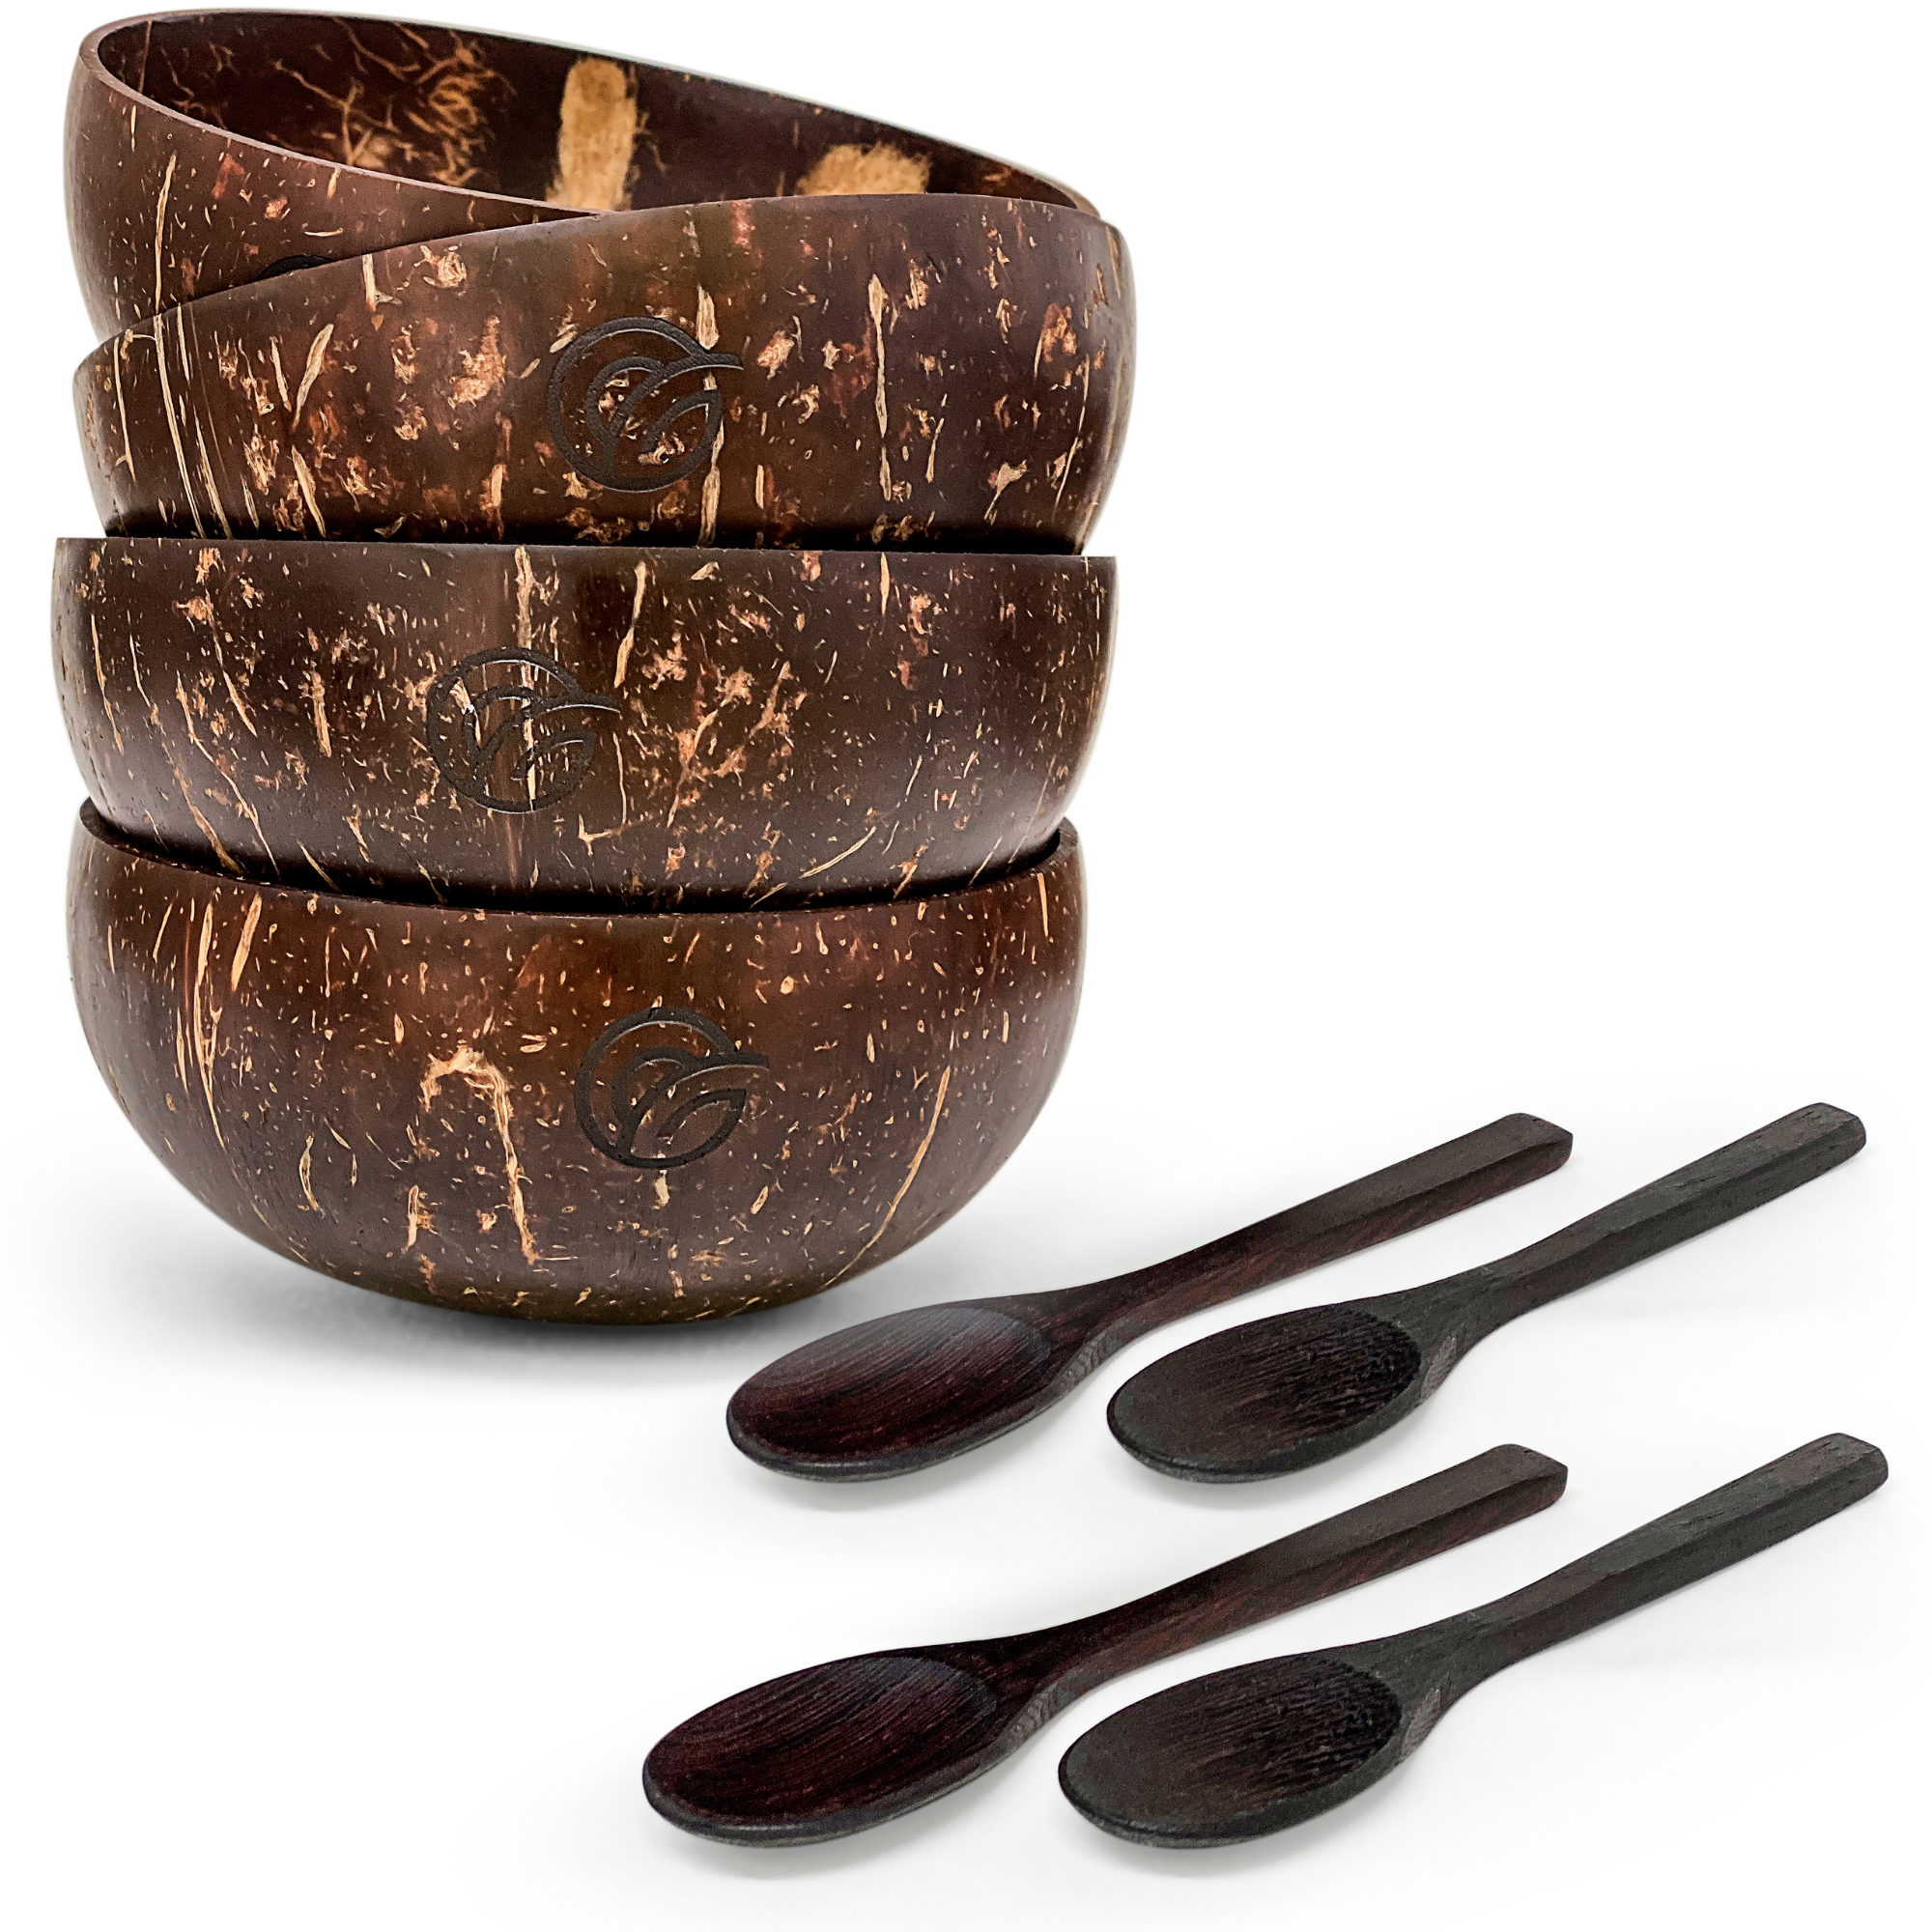 Coconut Bowls and Wooden Spoons Set of 4